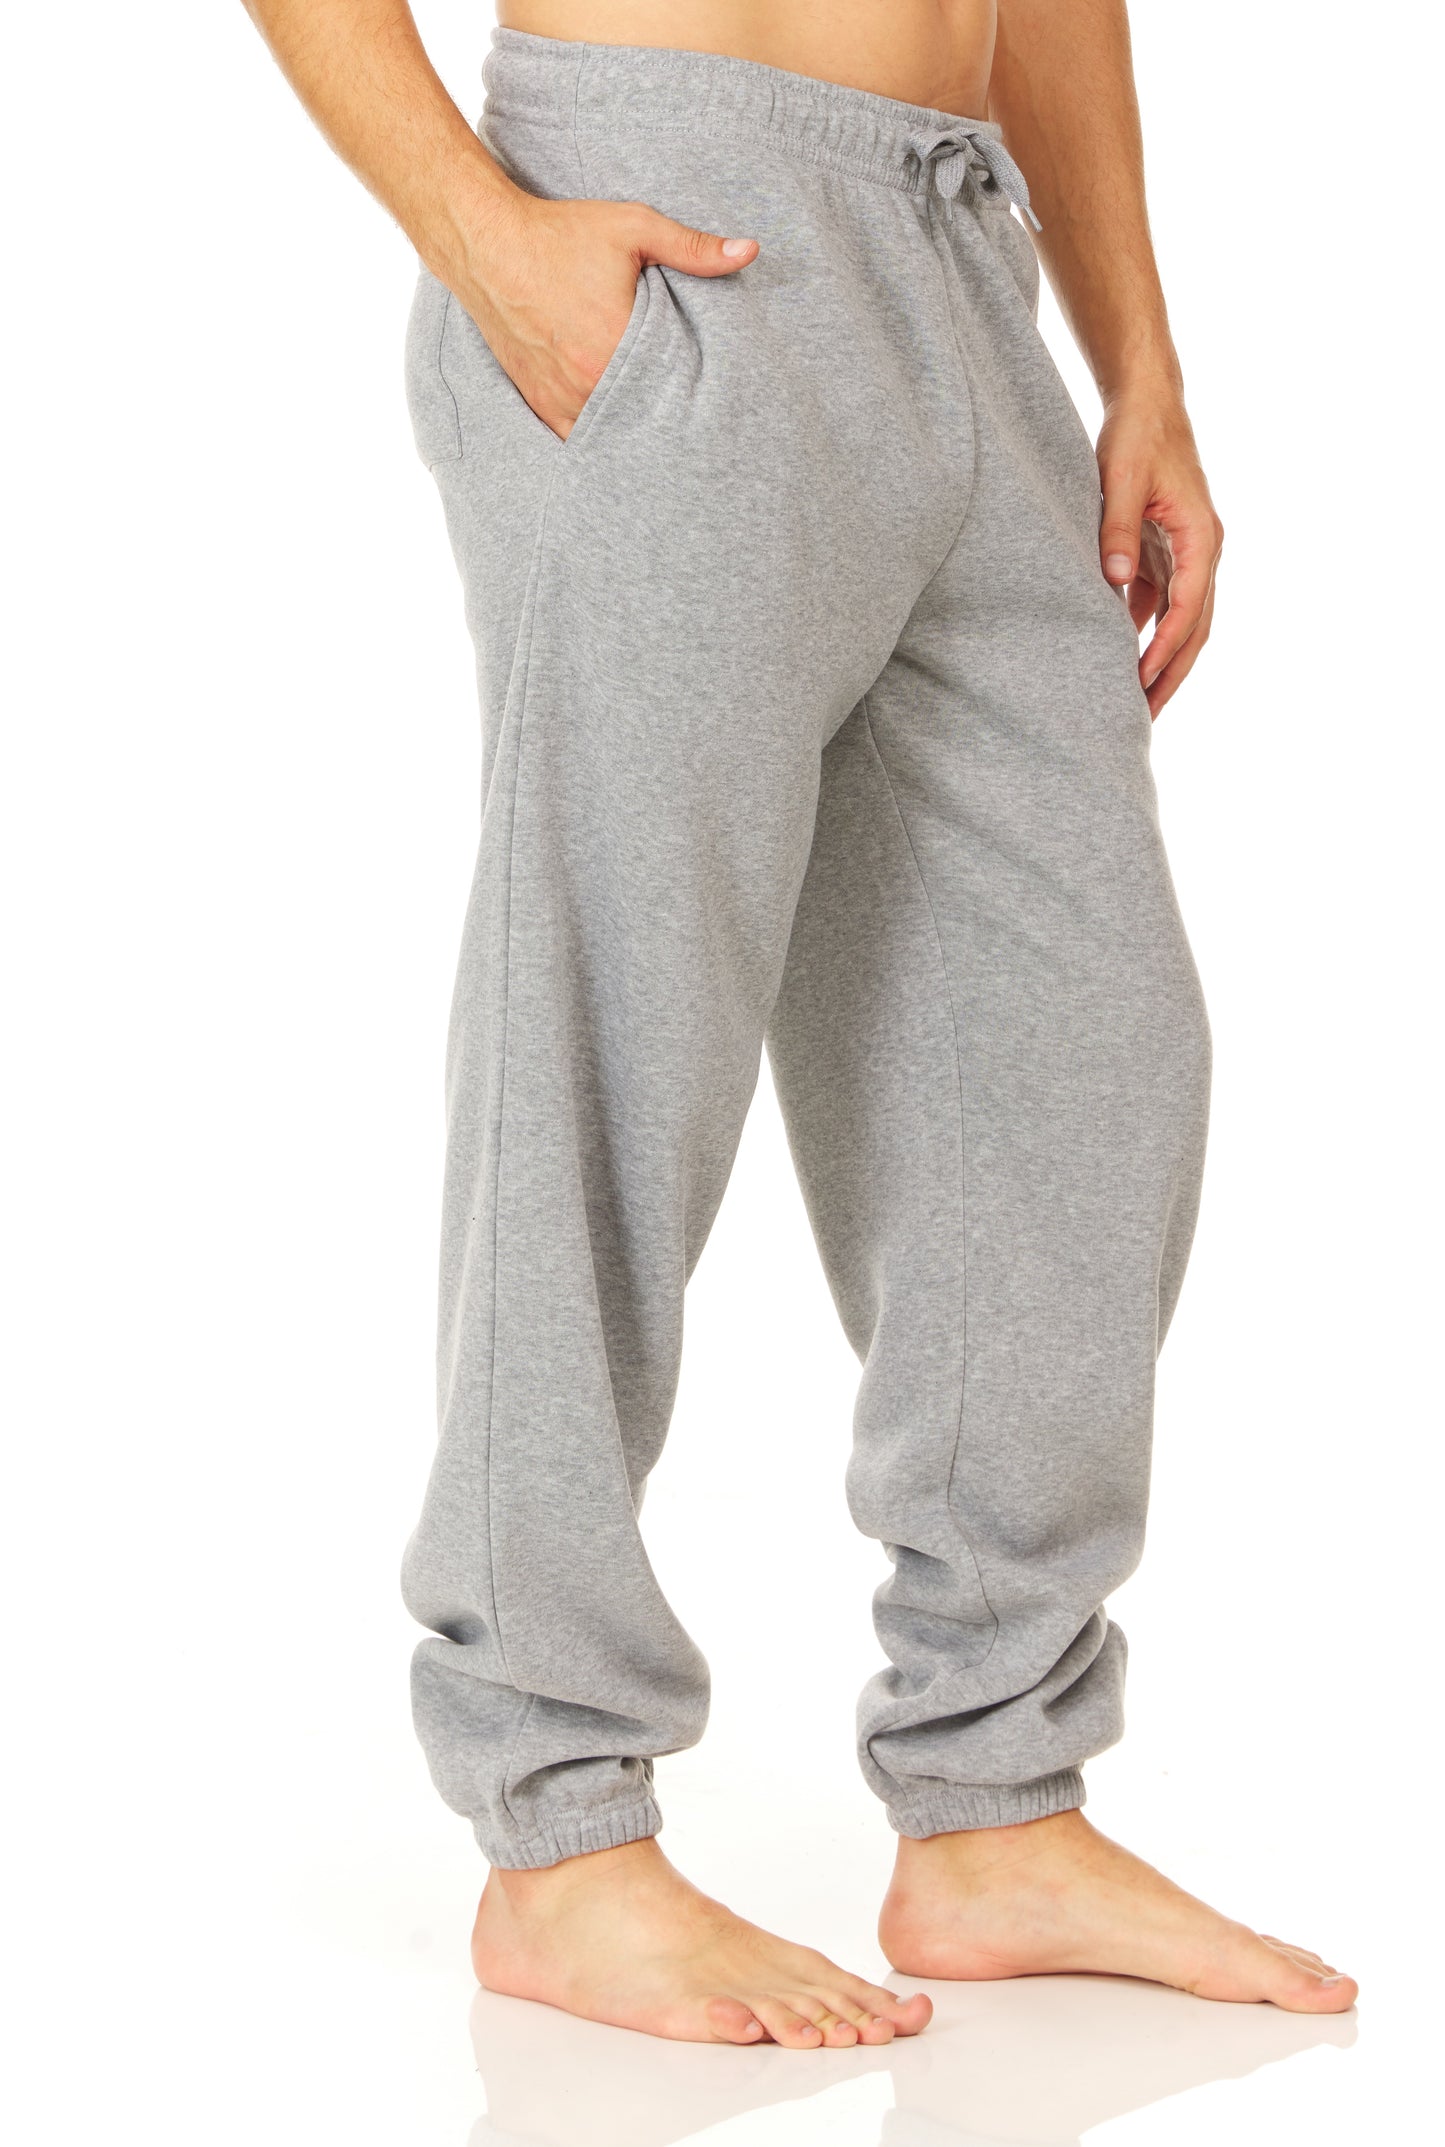 Mens Baggy Fleece Sweatpants Open Bottom Drawstring Waistband with Pockets - Unique Styles Asfoor